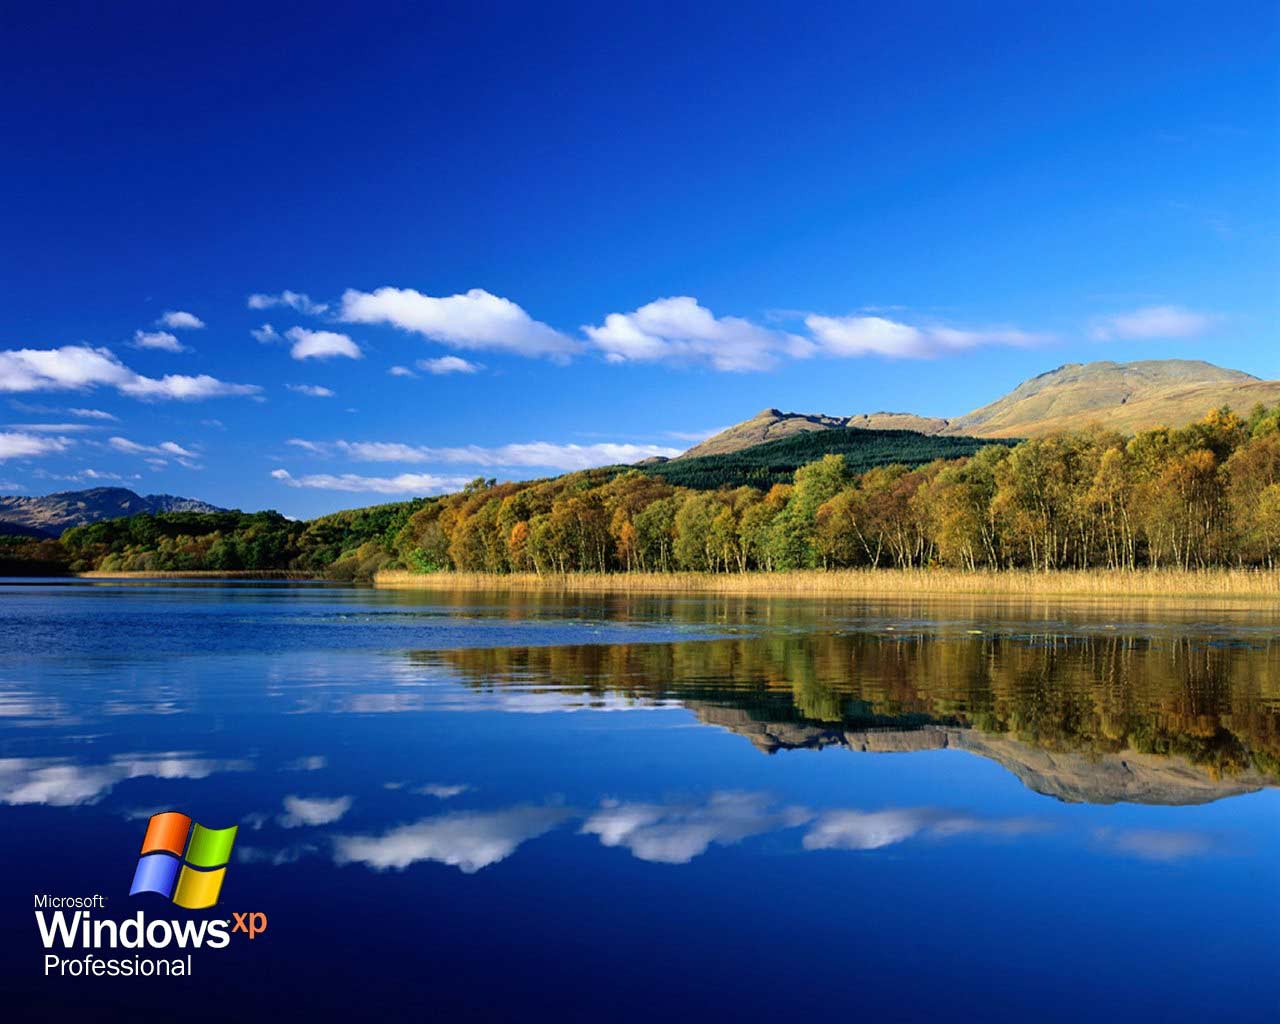 Windows Xp Wallpapers Top Free Windows Xp Backgrounds